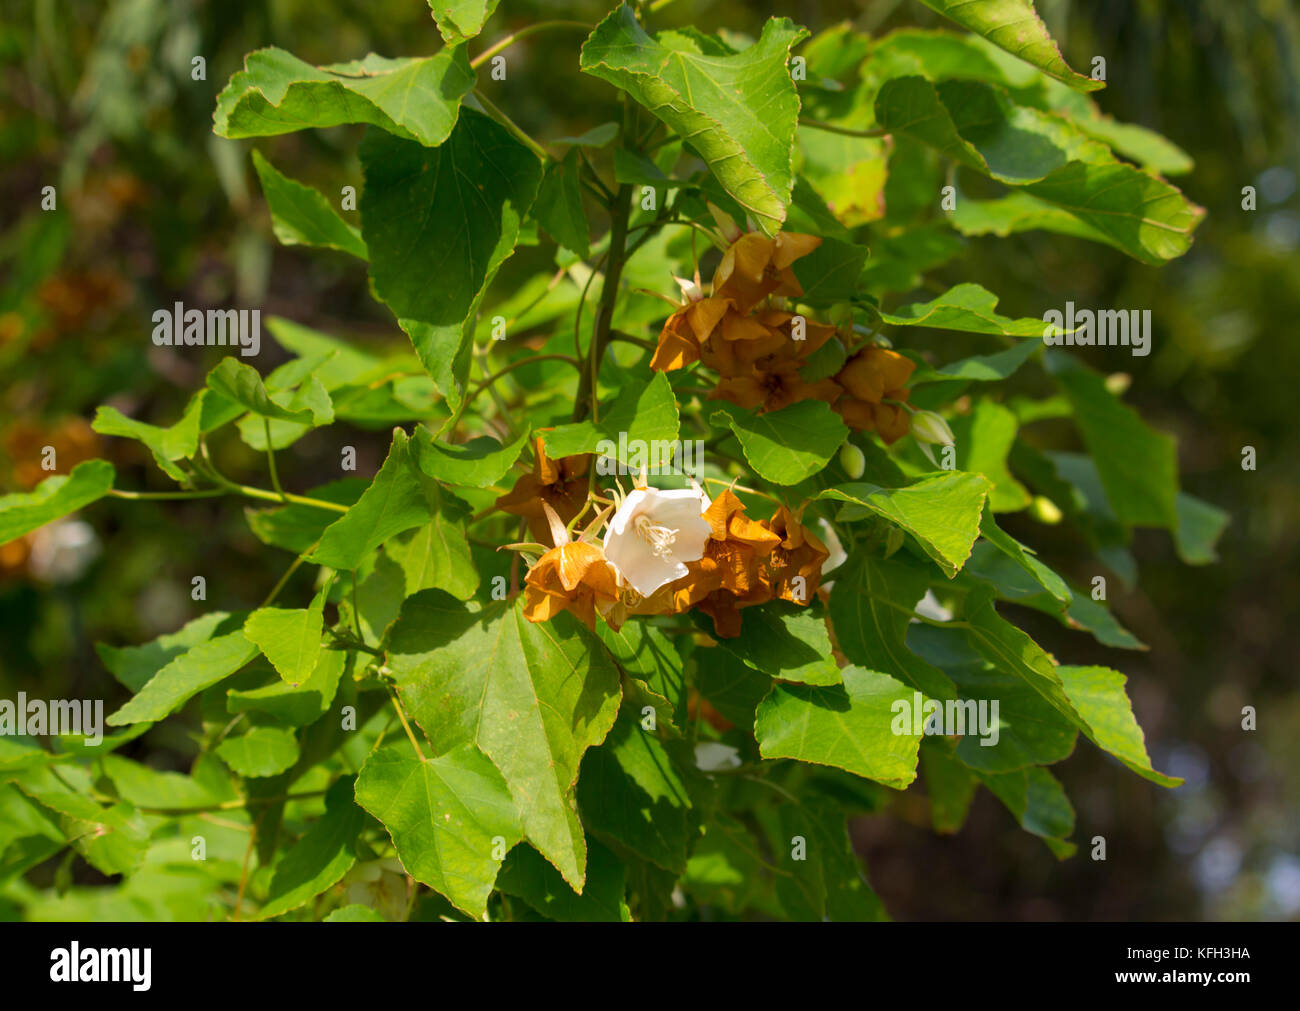 Delicate hanging dainty fragrant white cup shaped ornamental drooping flowers of  Dombeya natalensis  Natal Wedding Flower blooming in late autumn. Stock Photo